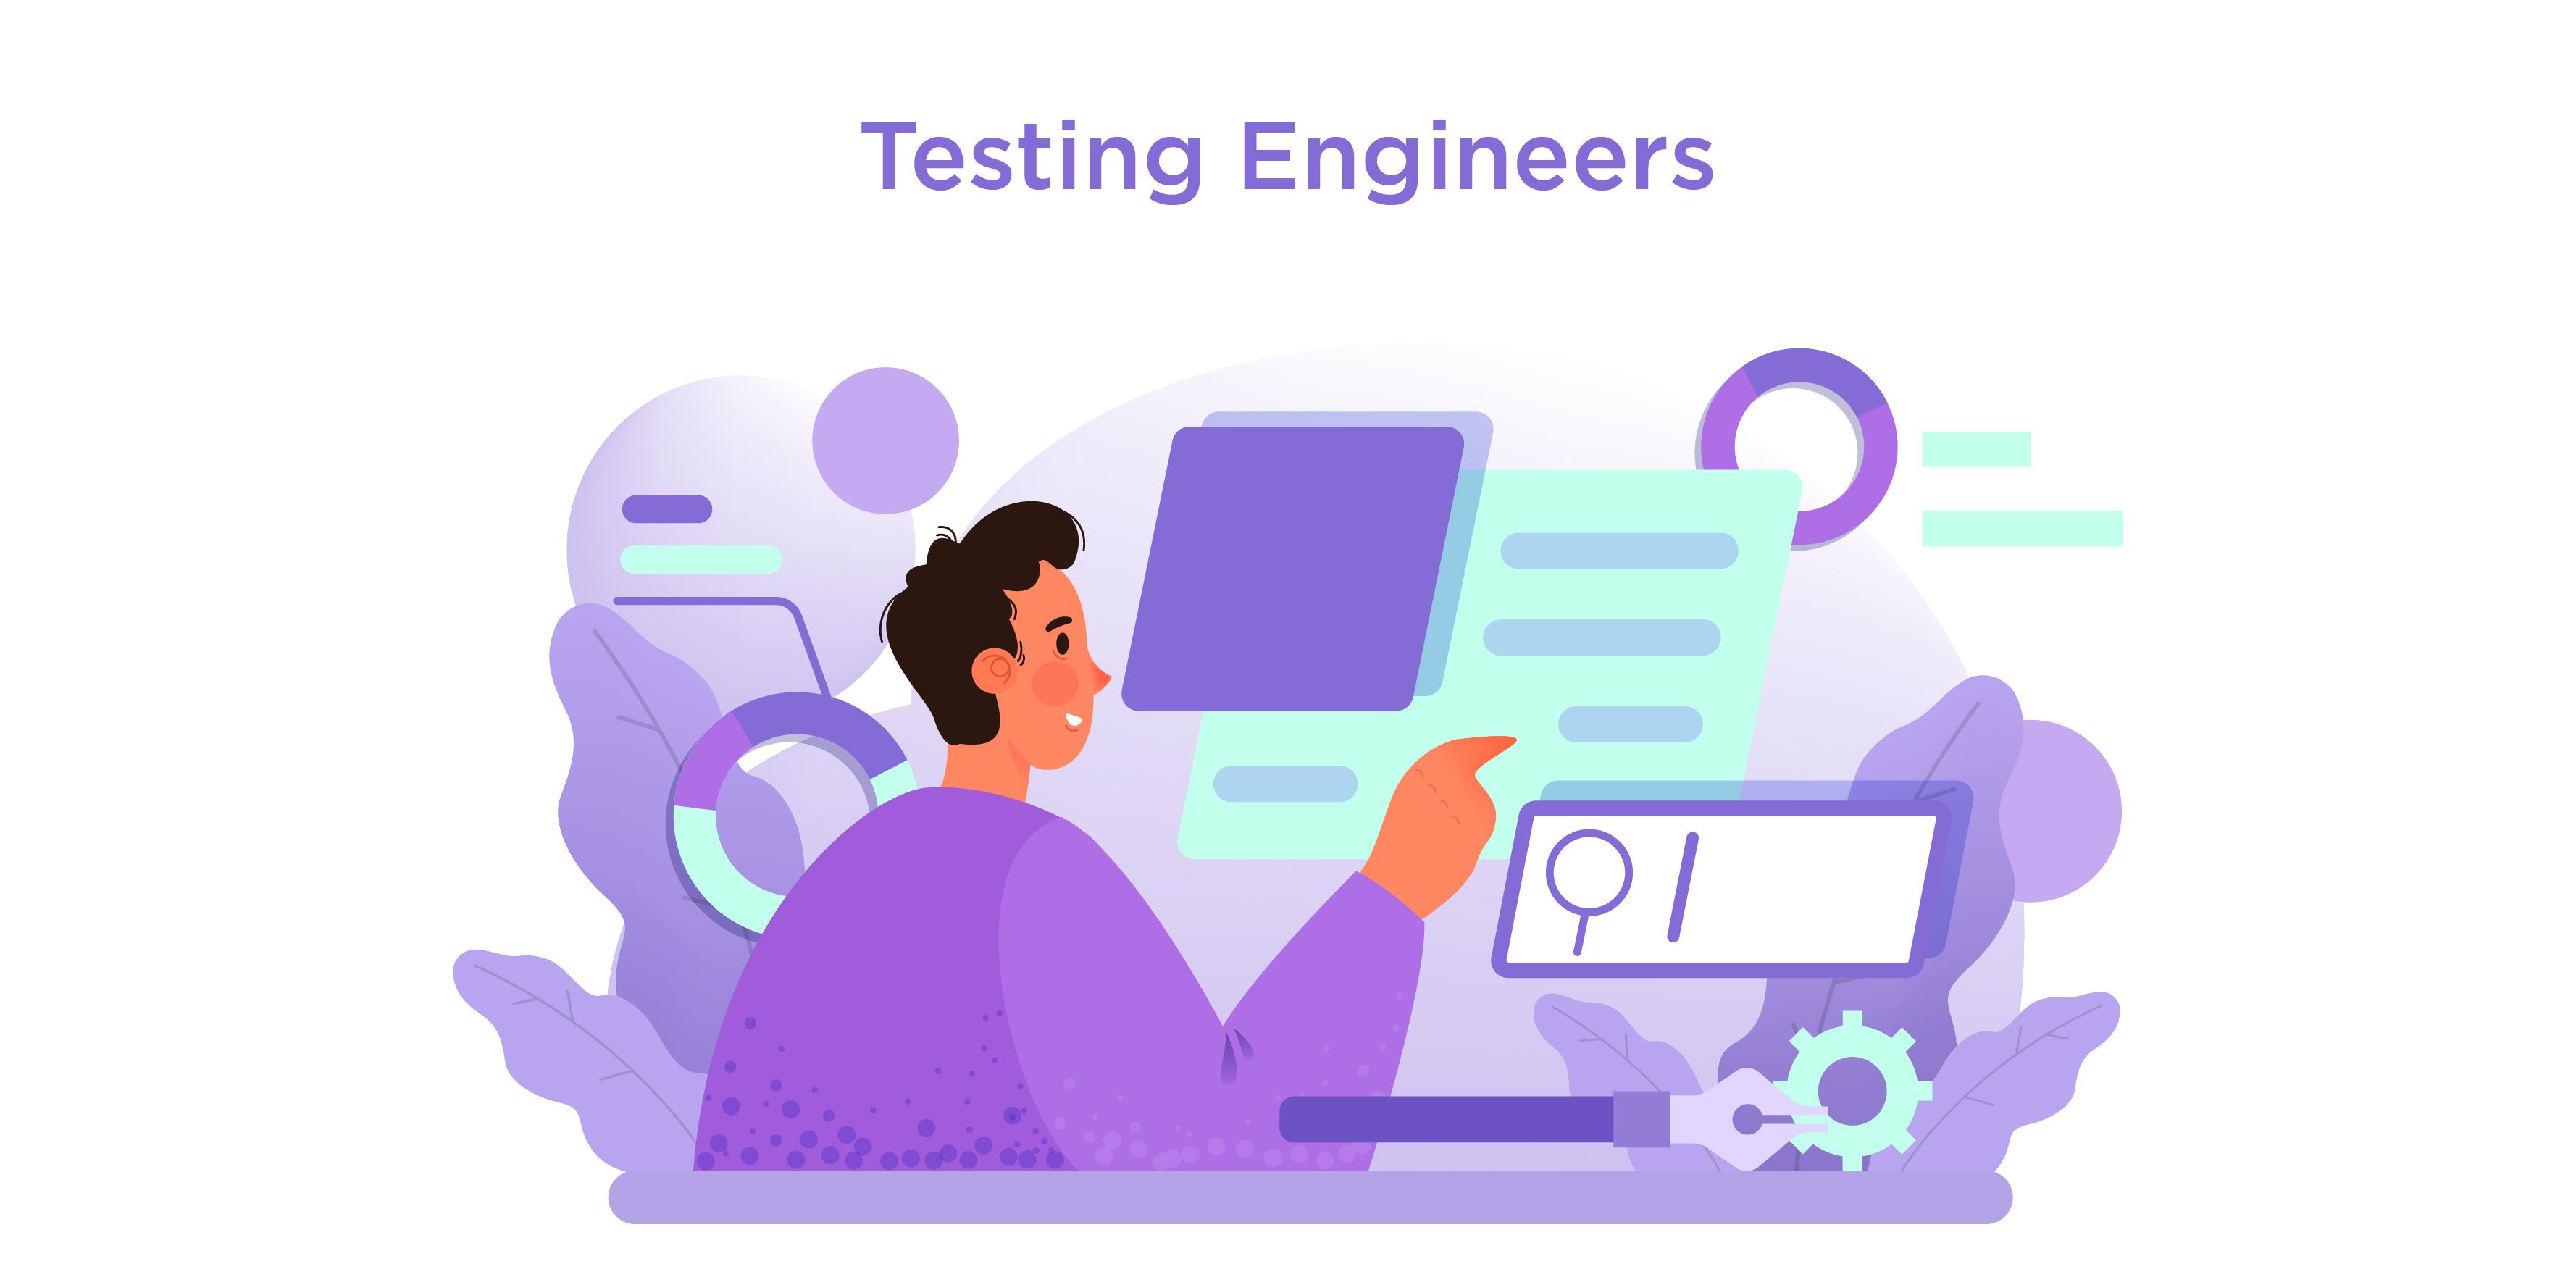 What do Testing Engineers do?